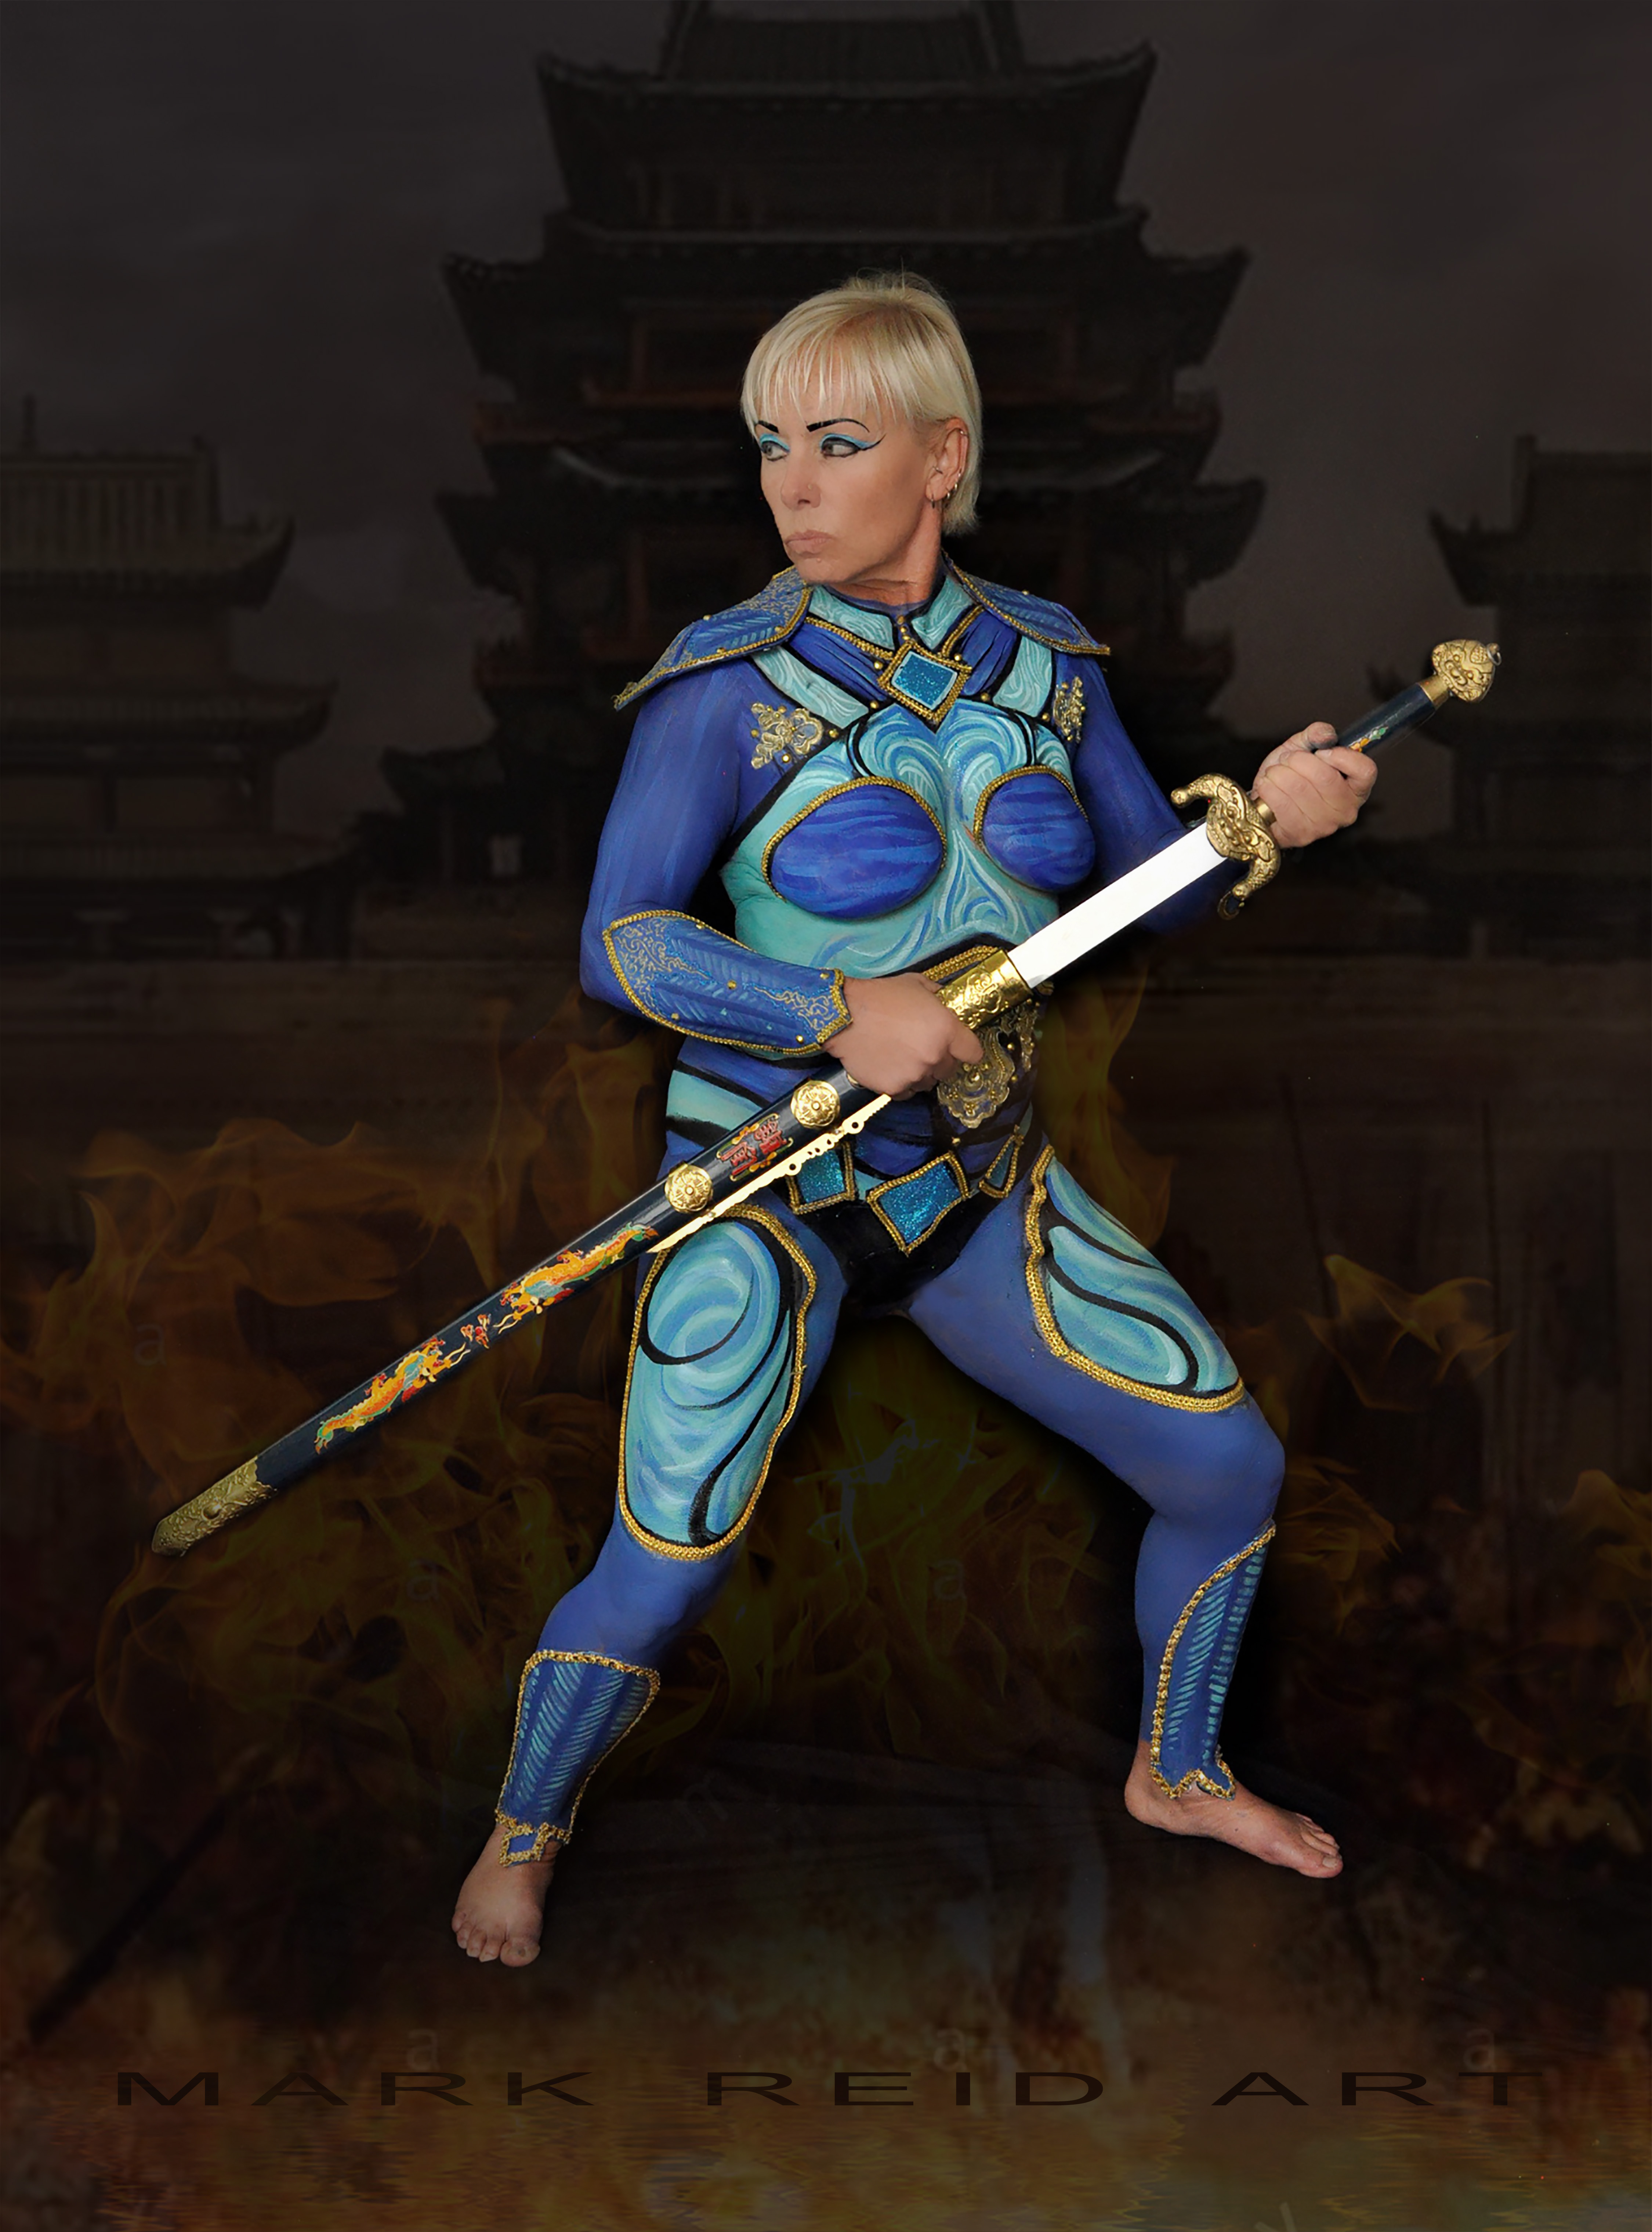 A blonde woman in full body paint that looks like blue and turqoise armor. She is holding a sword.